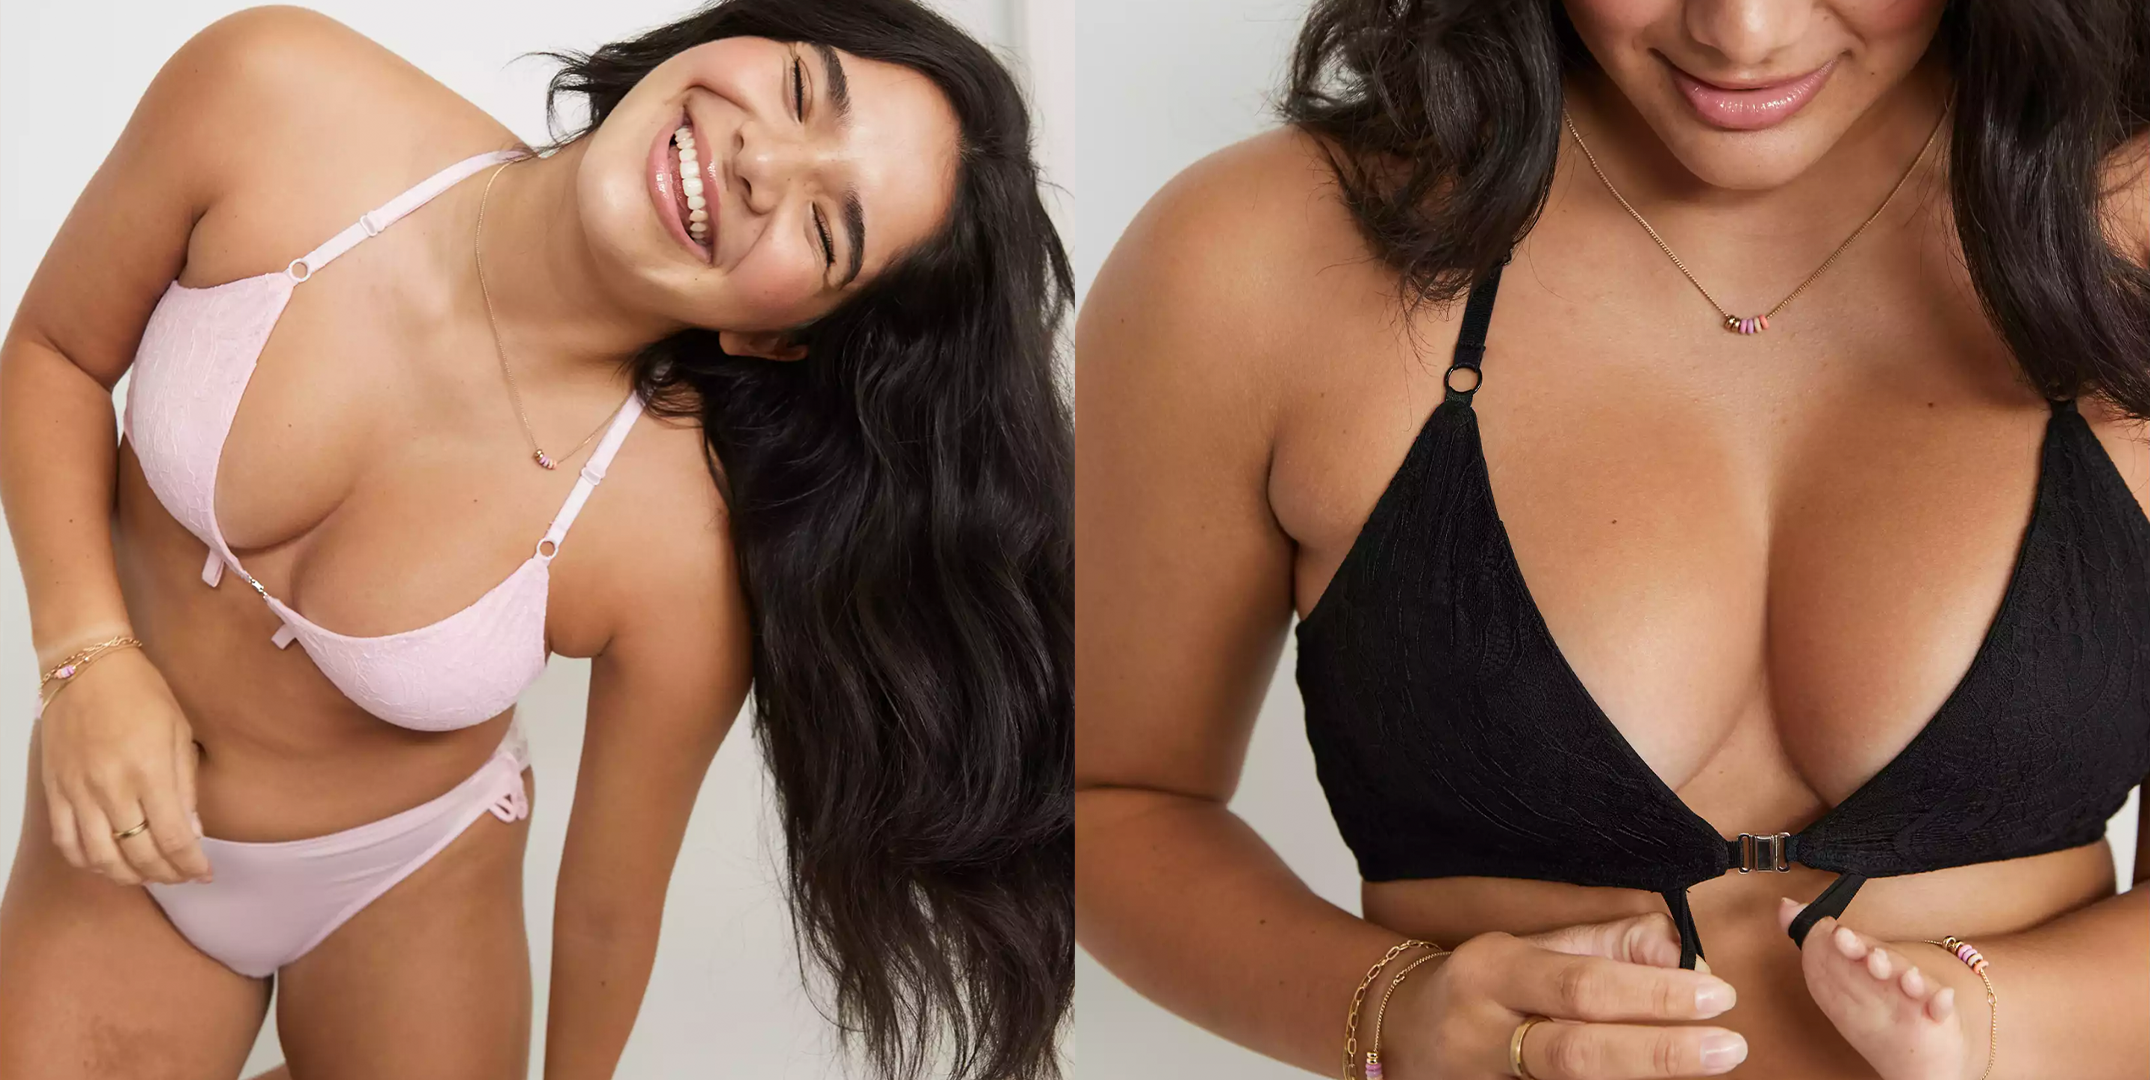 Bra Shop Livi Rae Lingerie Is Going Viral For Its Inclusive Ad Campaign